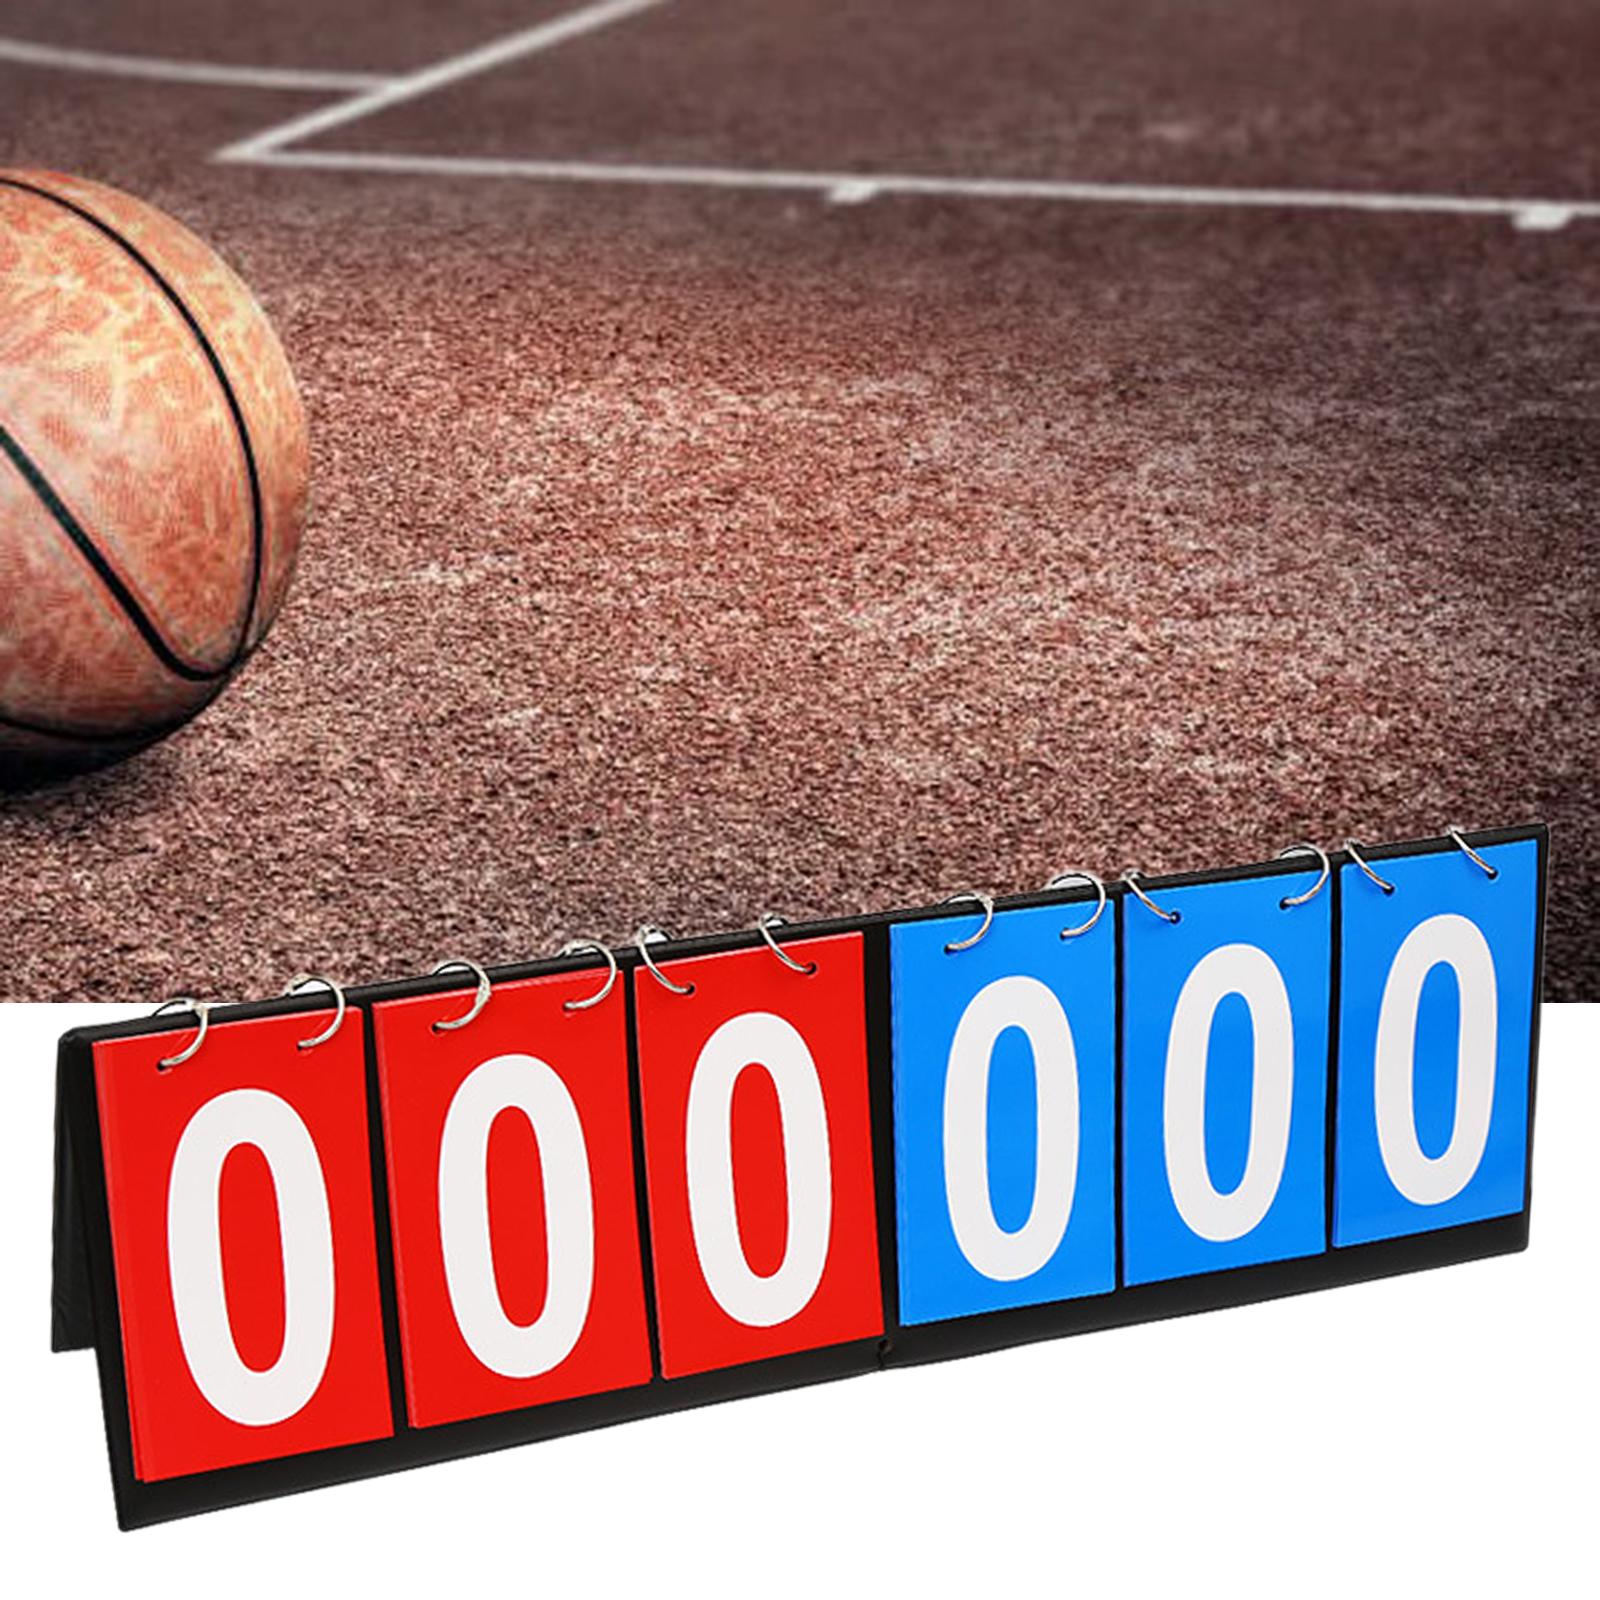 6 digits Table Top Scoreboard Portable Scoring for Tennis Ball Indoor Games Red and Blue